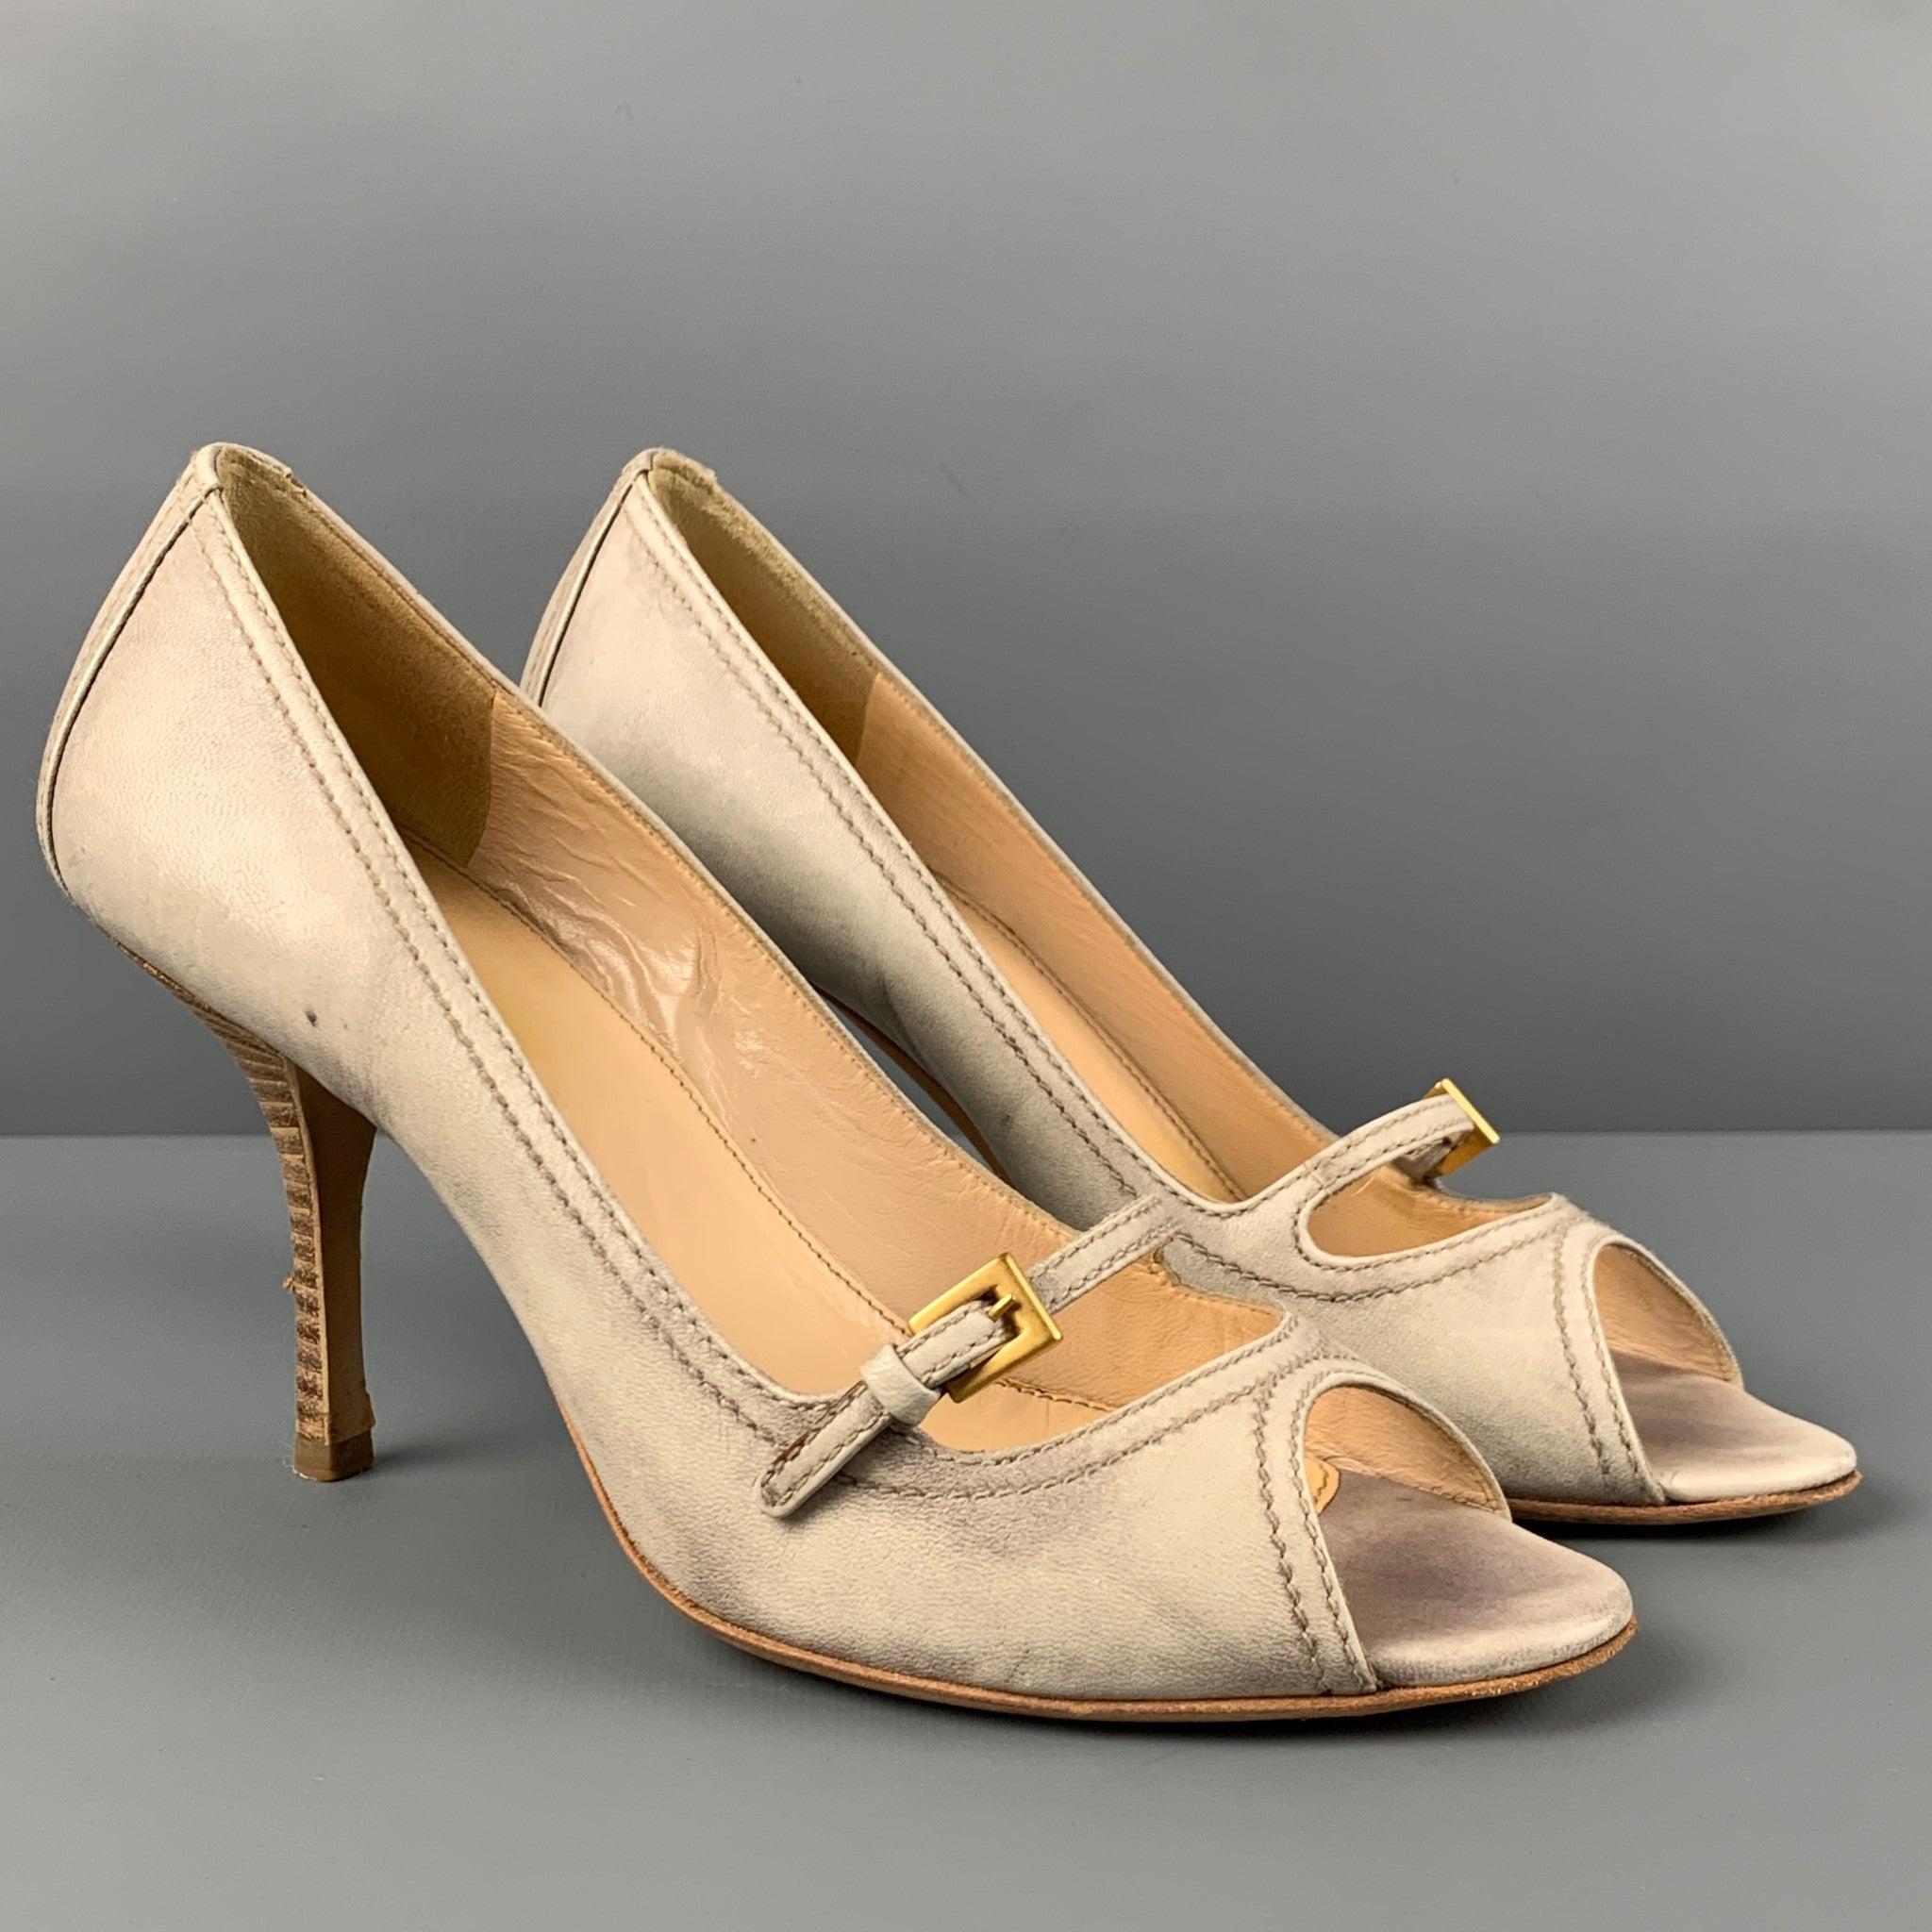 PRADA pumps comes in a beige marbled leather featuring a side buckle detail, open toe, and a stiletto heel. Made in Italy.
Very Good
Pre-Owned Condition. 

Marked:   37 

Measurements: 
  Heel: 3.5 inches 
  
  
 
Reference: 119044
Category: